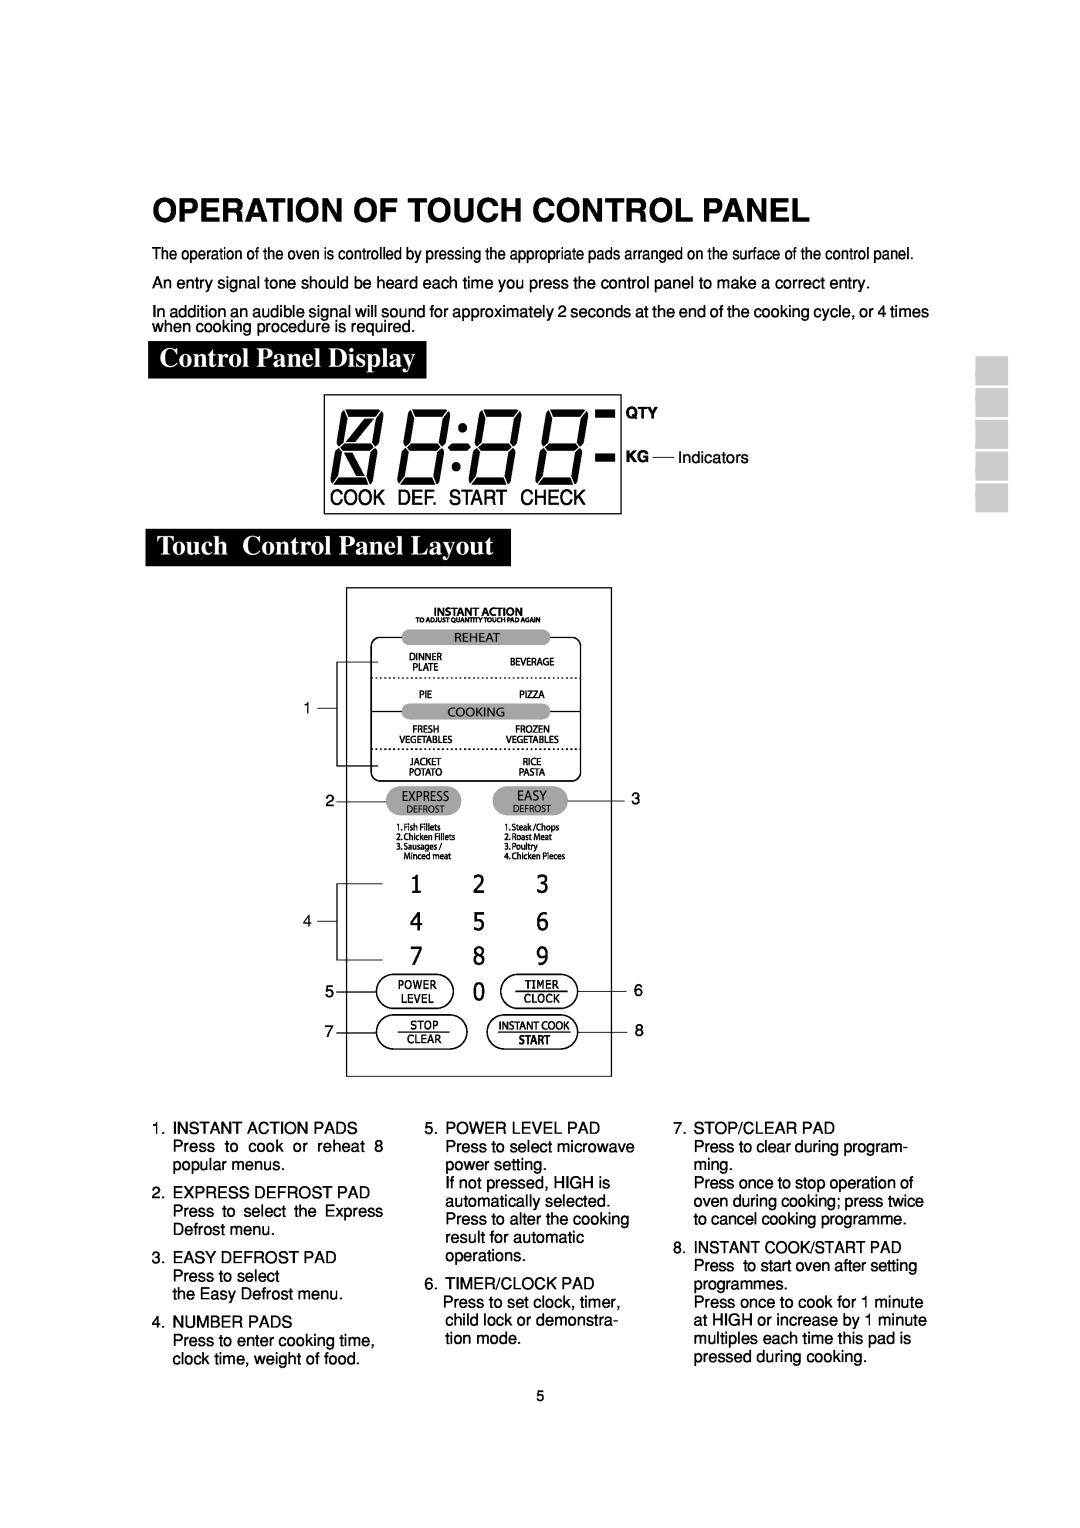 Sharp R-390H(S) operation manual Operation Of Touch Control Panel, Control Panel Display, Touch Control Panel Layout 